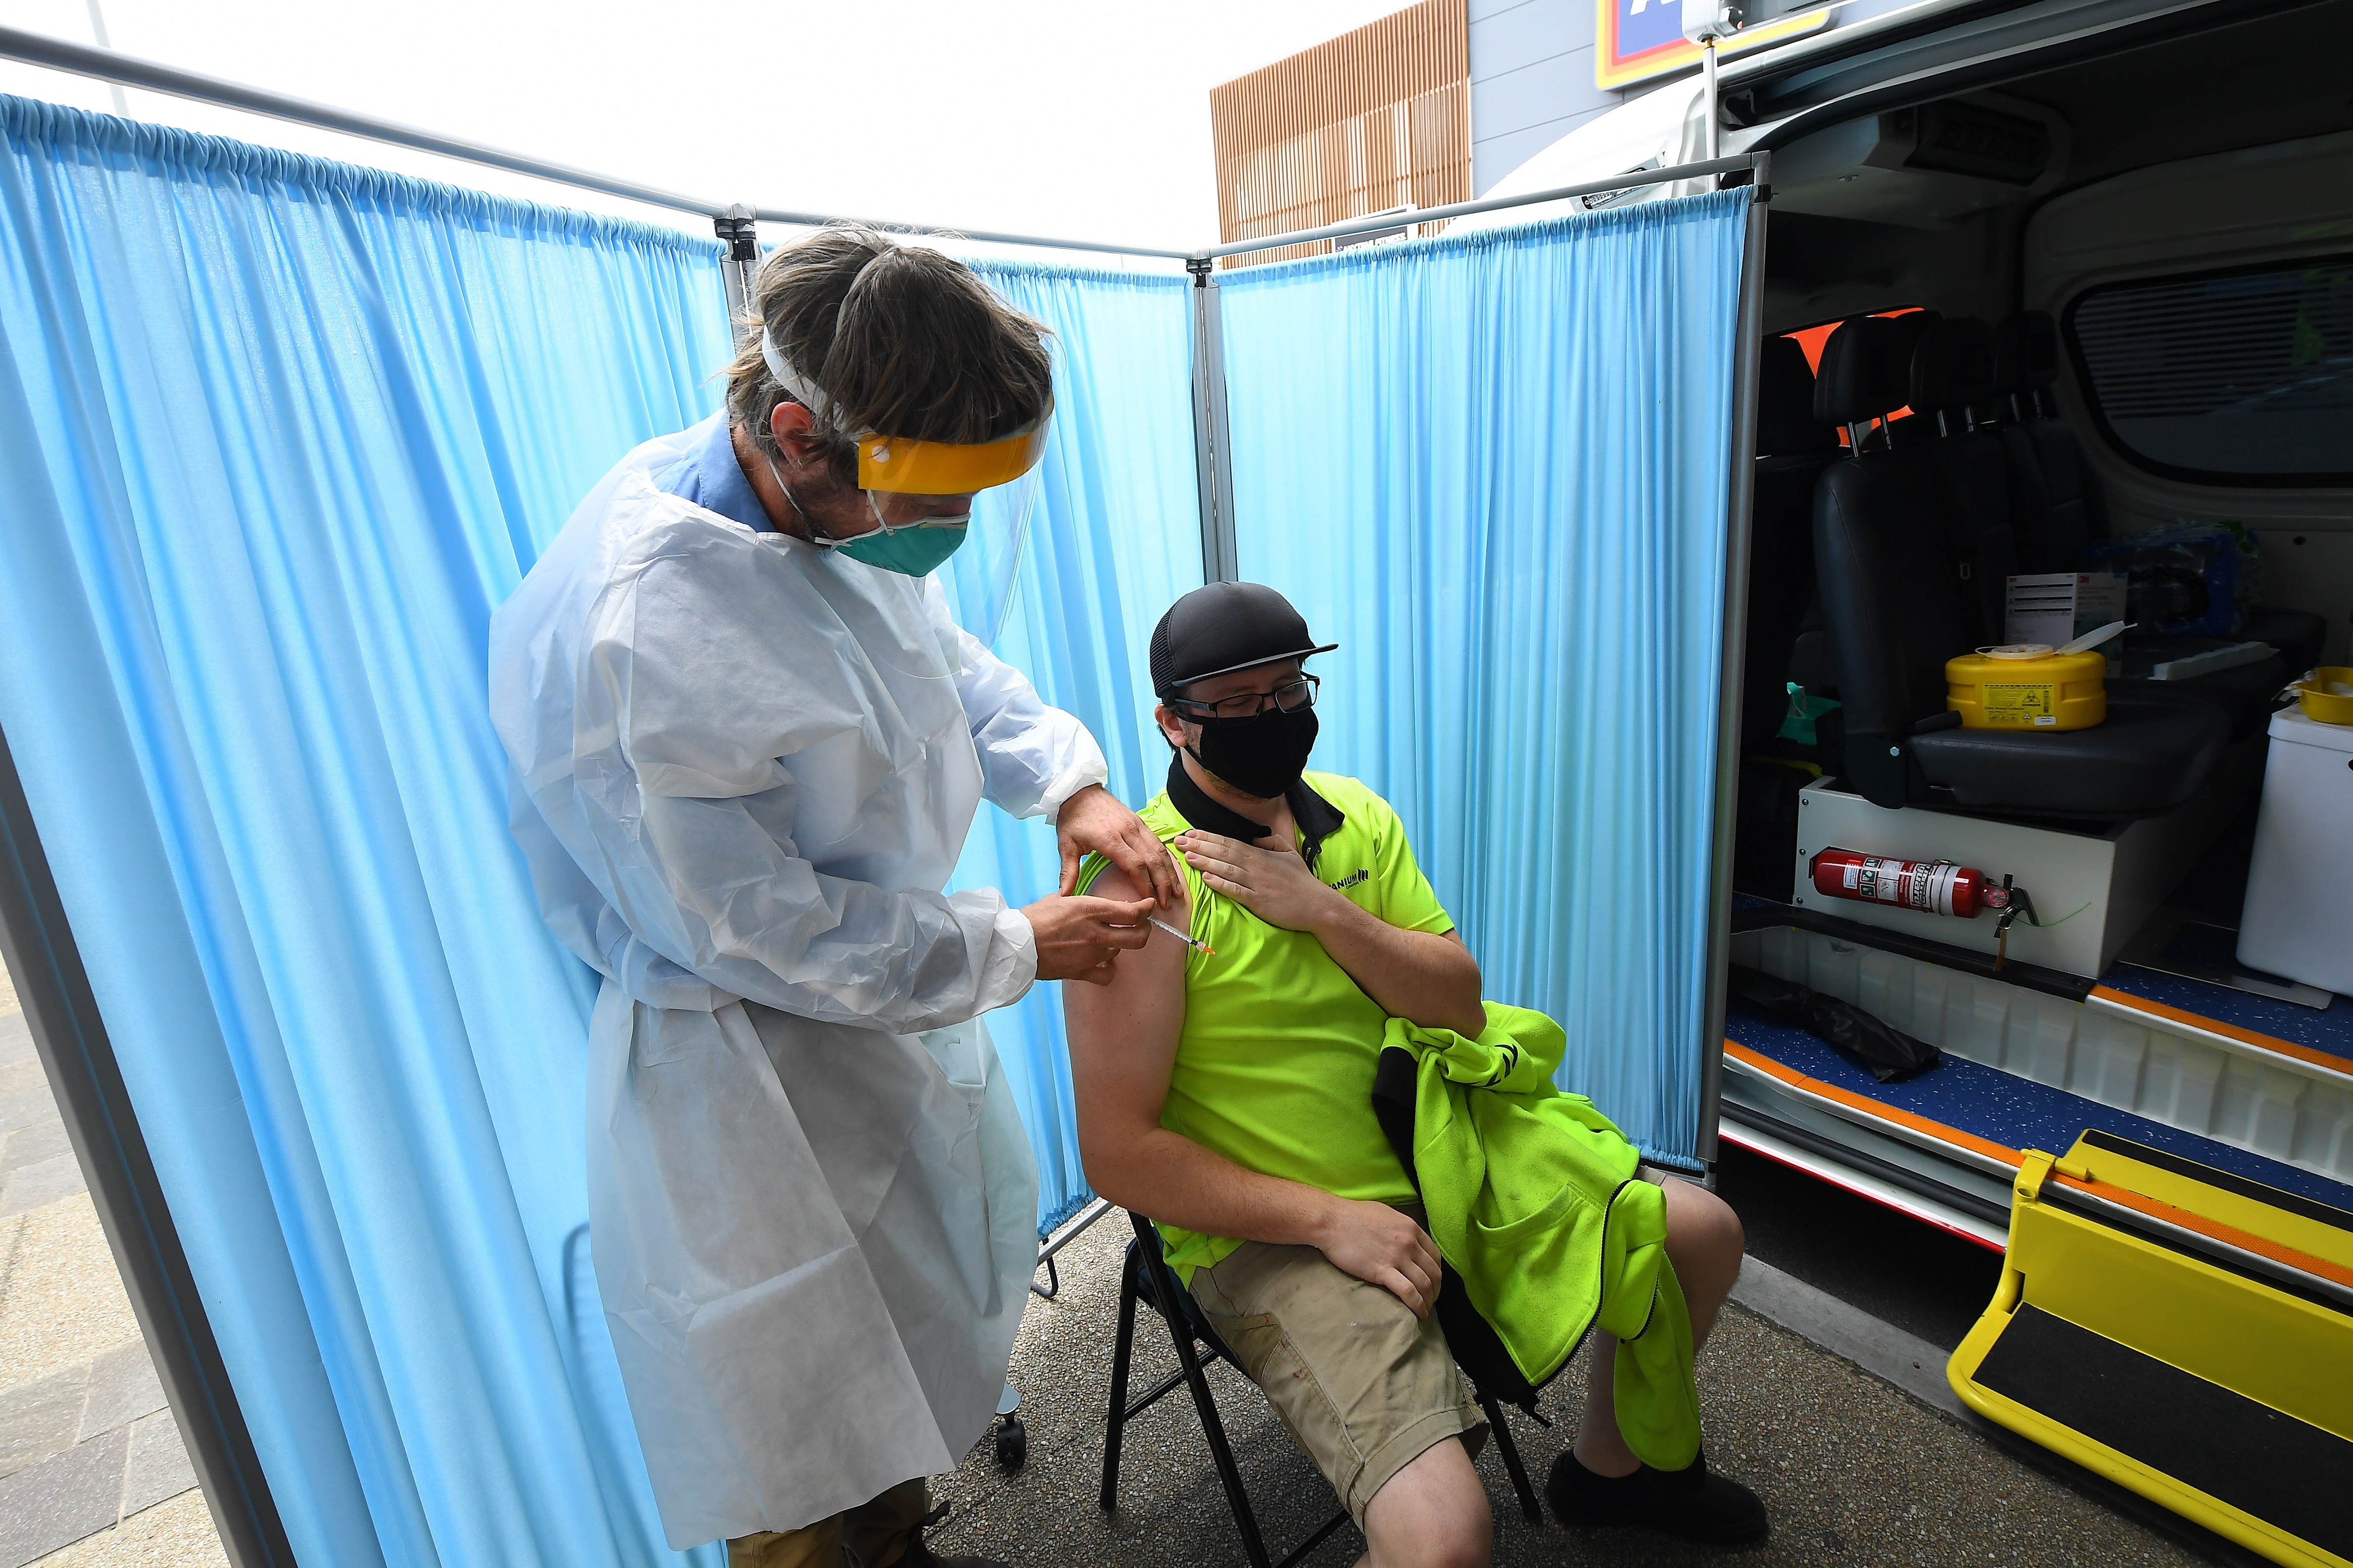 A healthcare worker speaks to a patient after administering a Covid19 vaccination at a pop-up vaccination van in Epping, Melbourne.